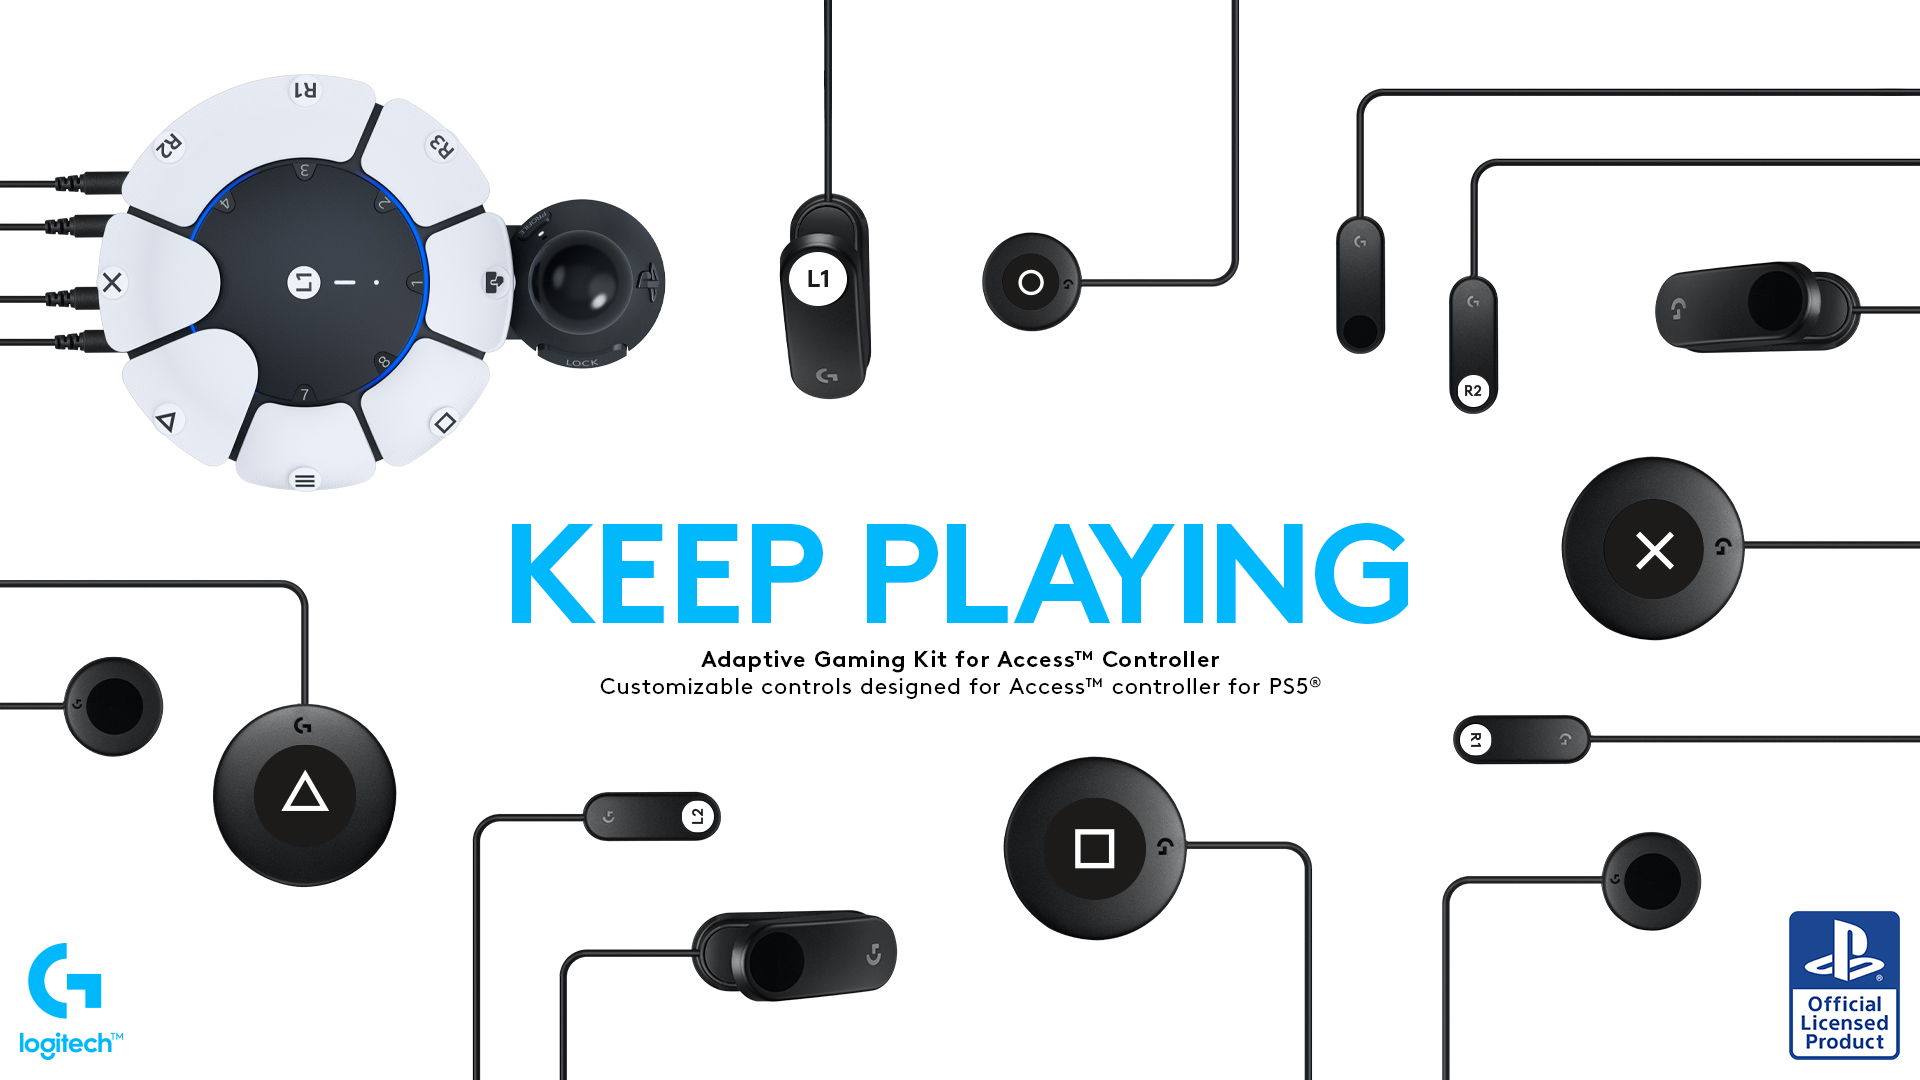 Play for All – Logitech G Introduces Adaptive Gaming Kit for Access™ Controller for the PS5 Console